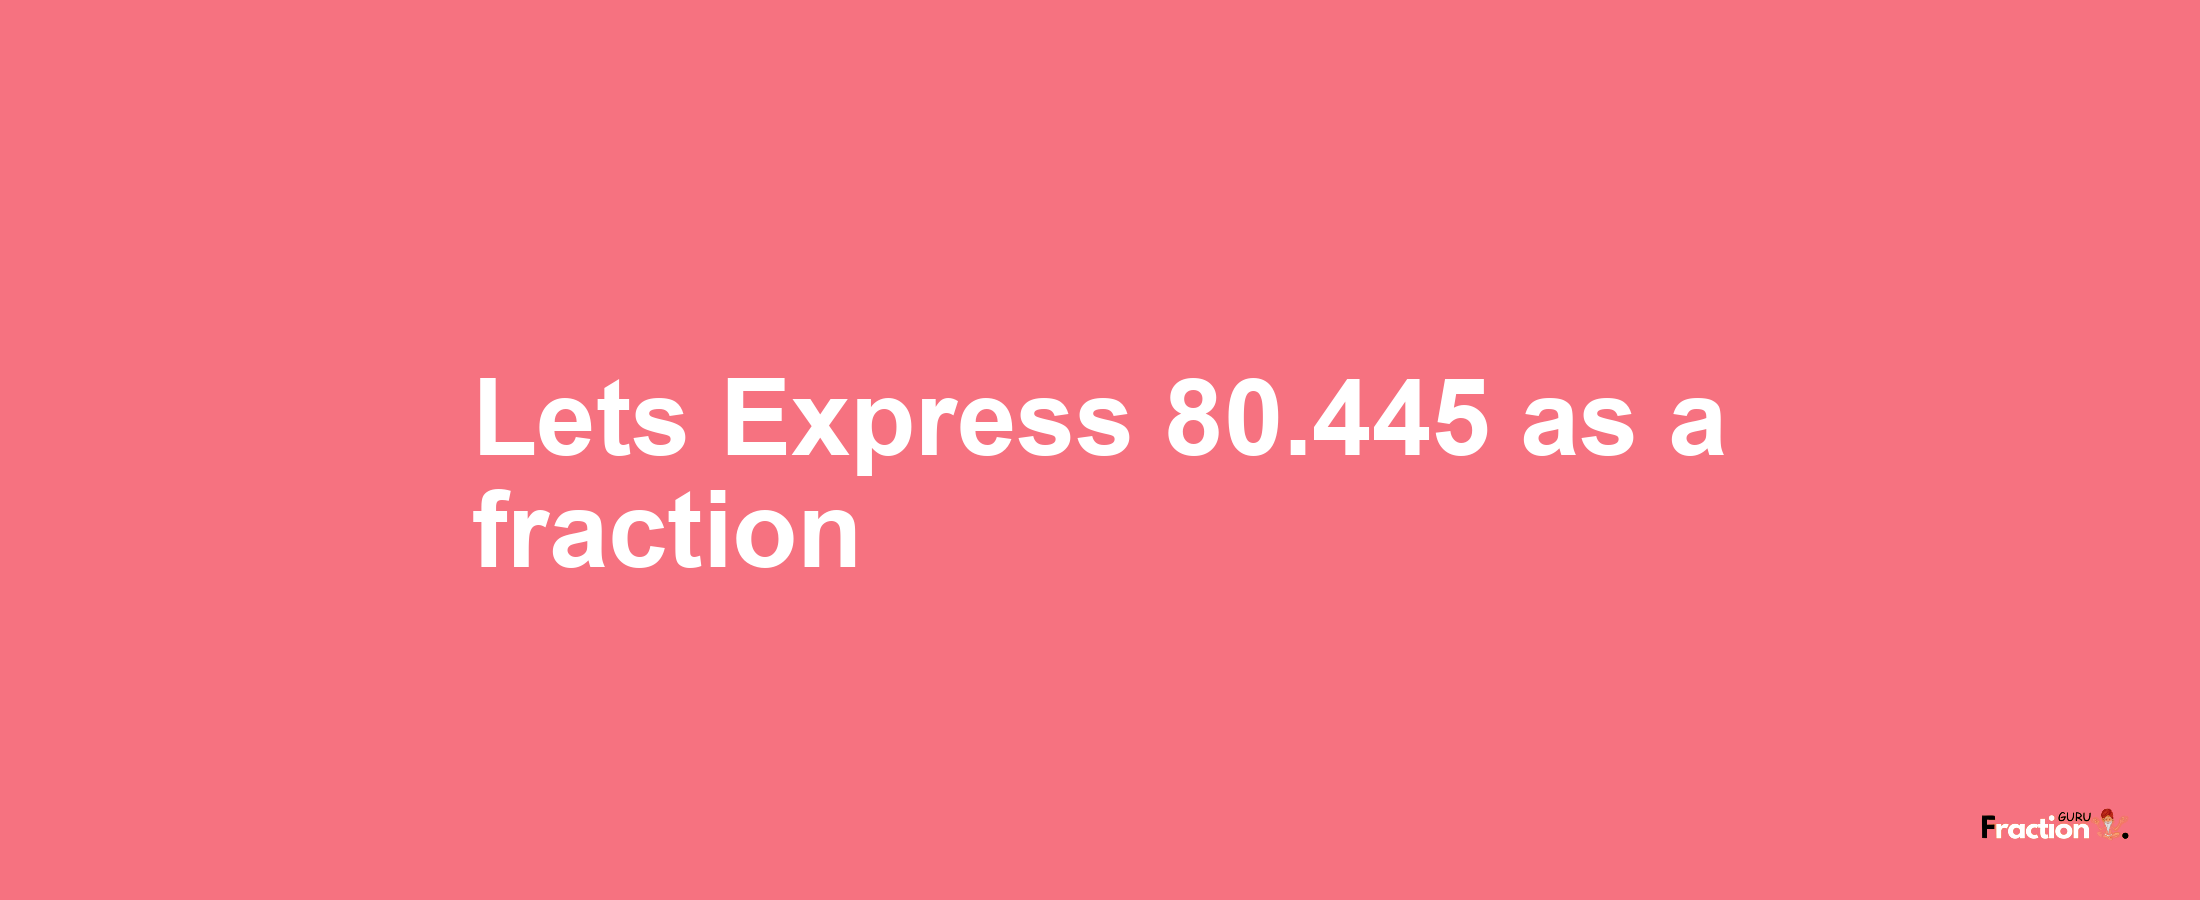 Lets Express 80.445 as afraction